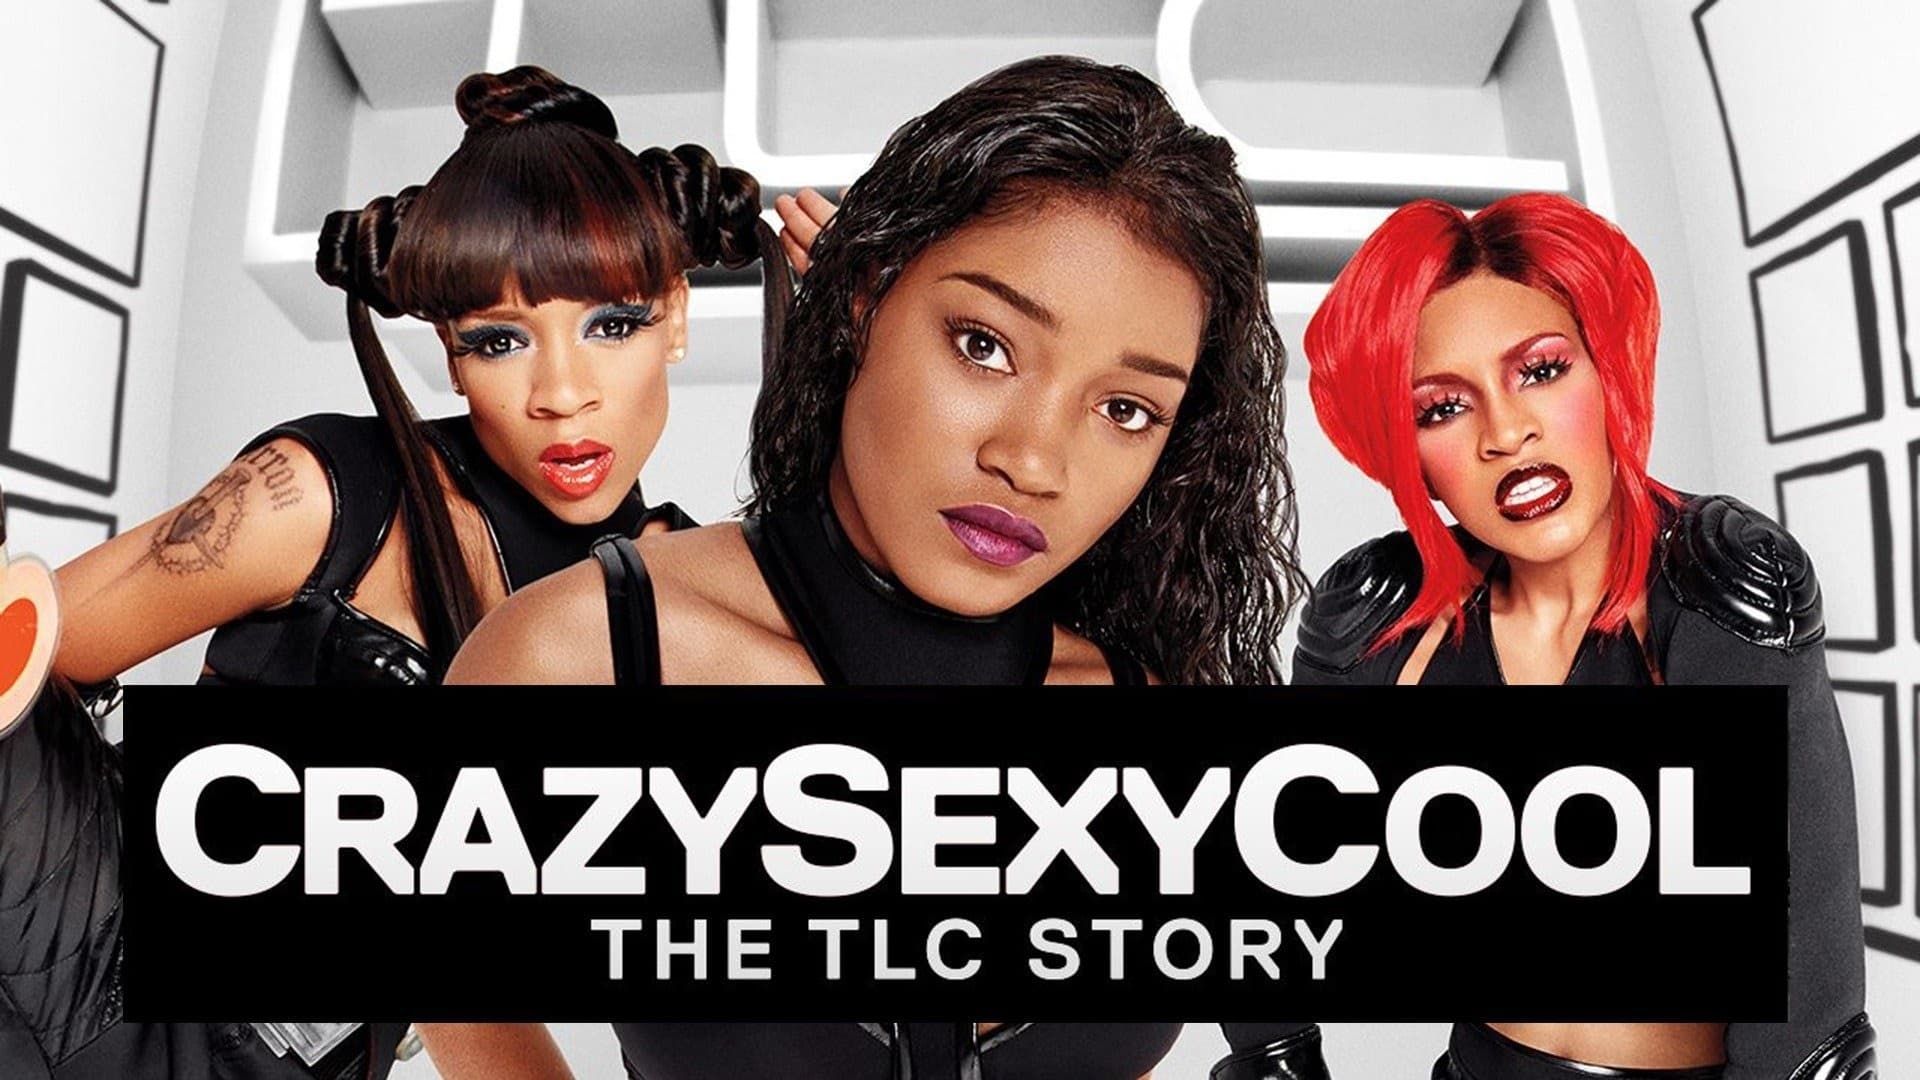 CrazySexyCool: The TLC Story background